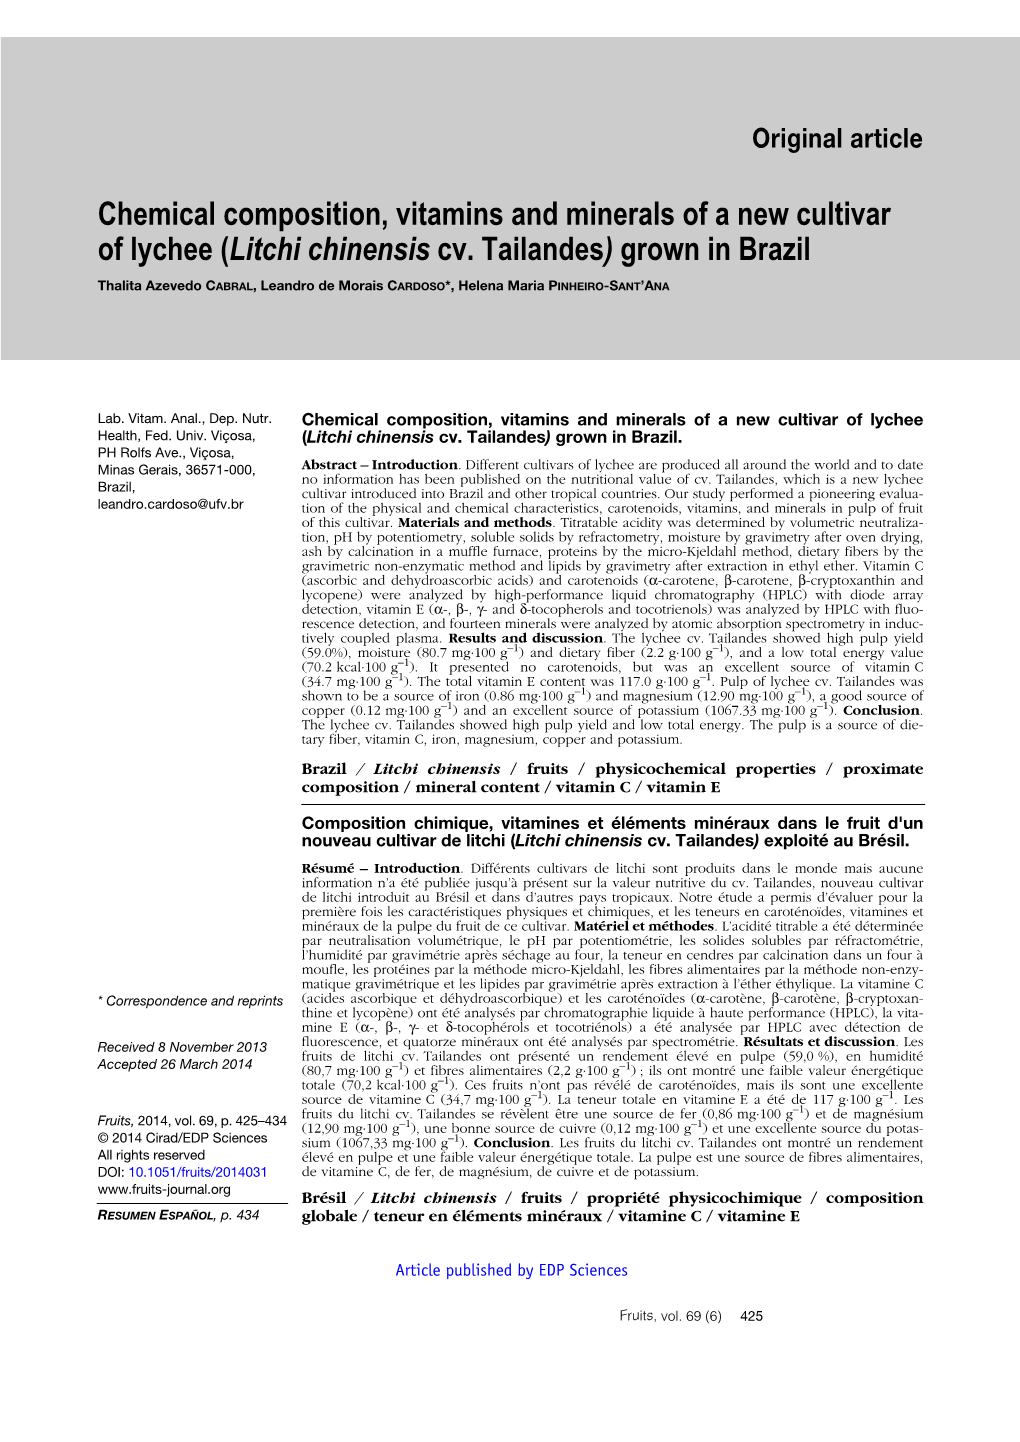 Chemical Composition, Vitamins and Minerals of a New Cultivar of Lychee \(Litchi Chinensis Cv. Tailandes\) Grown in Brazil